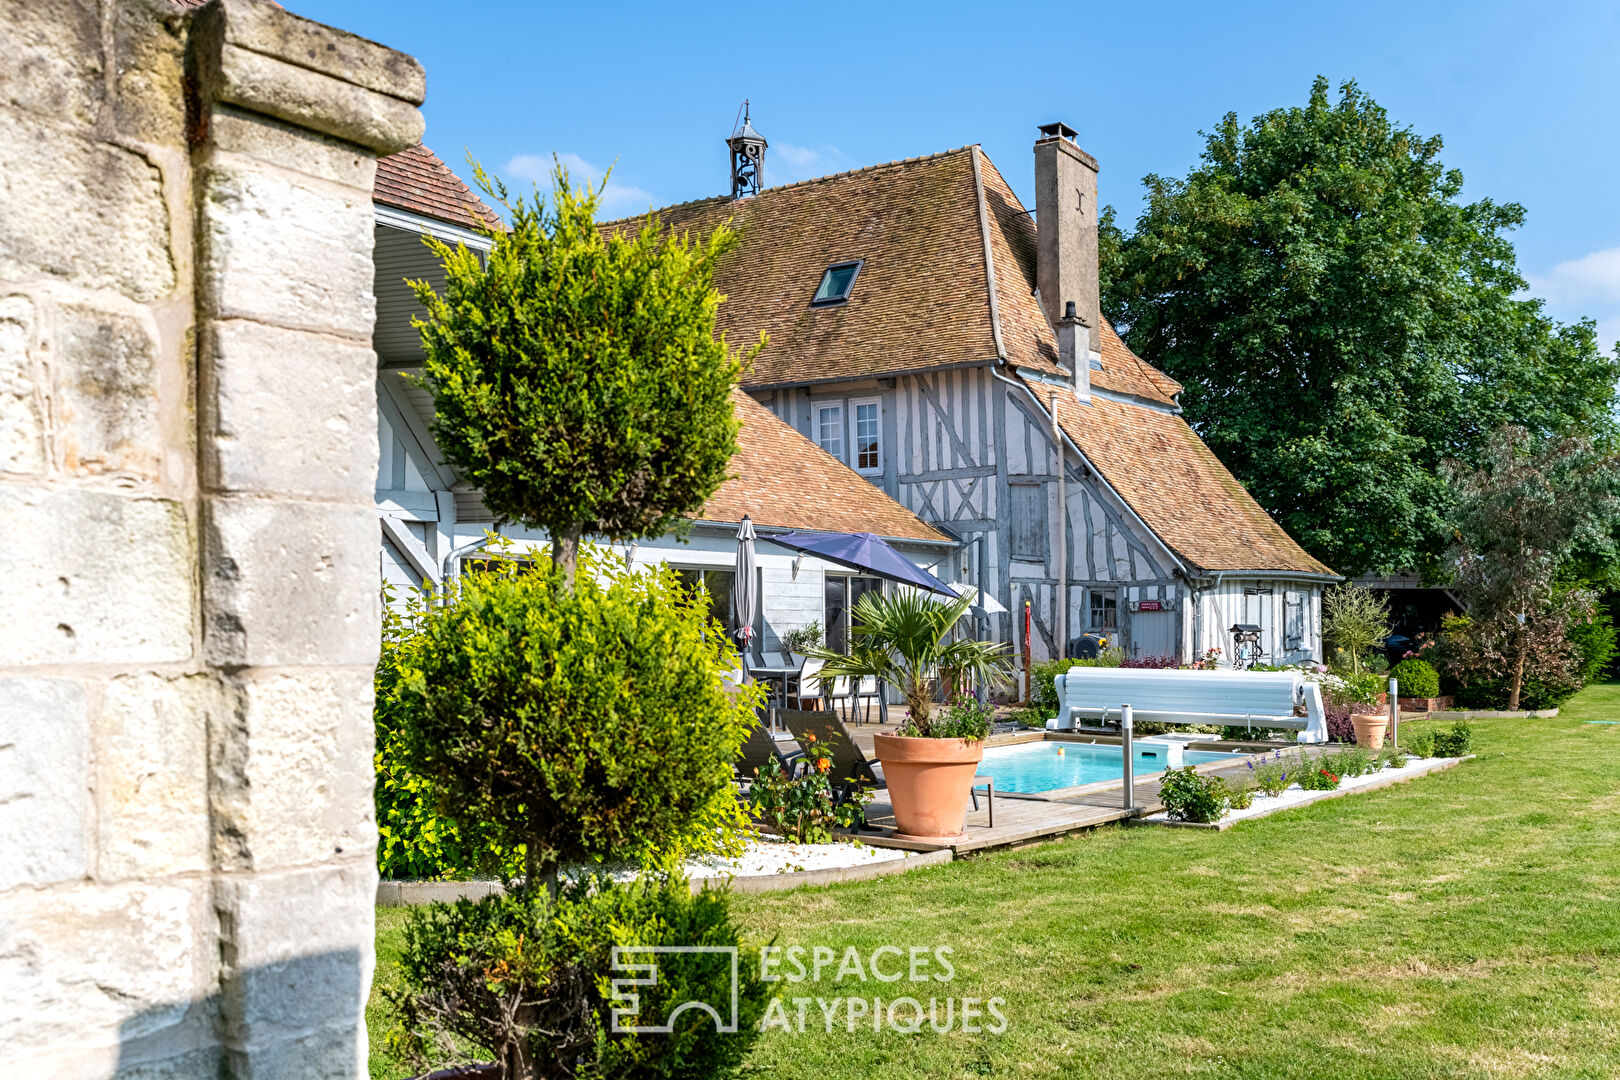 18th century manor house with a swimming pool in an enchanting setting